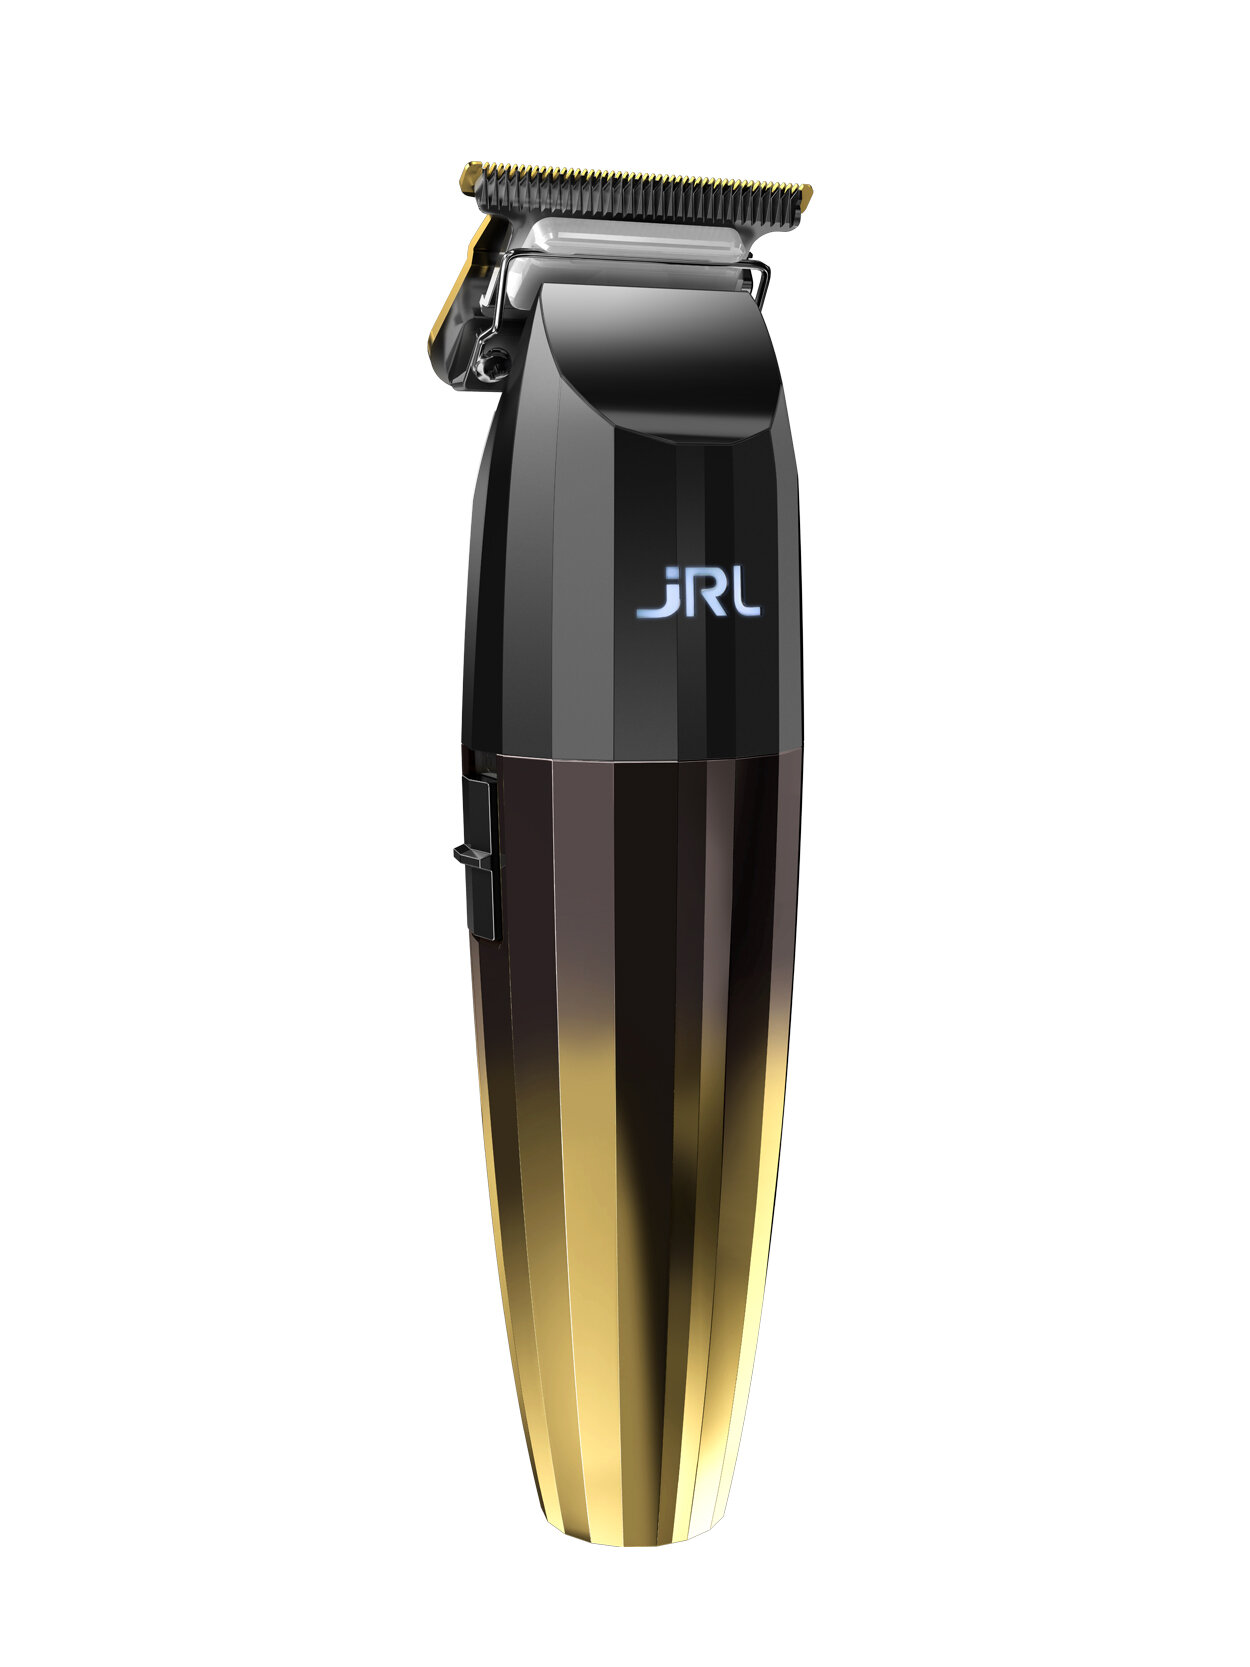 Series JRL Fresh Fade 2020C Clipper - Professional Hair Clippers  w/Cool Blade Technology for Men's Grooming - Rechargeable Clippers w/LCD